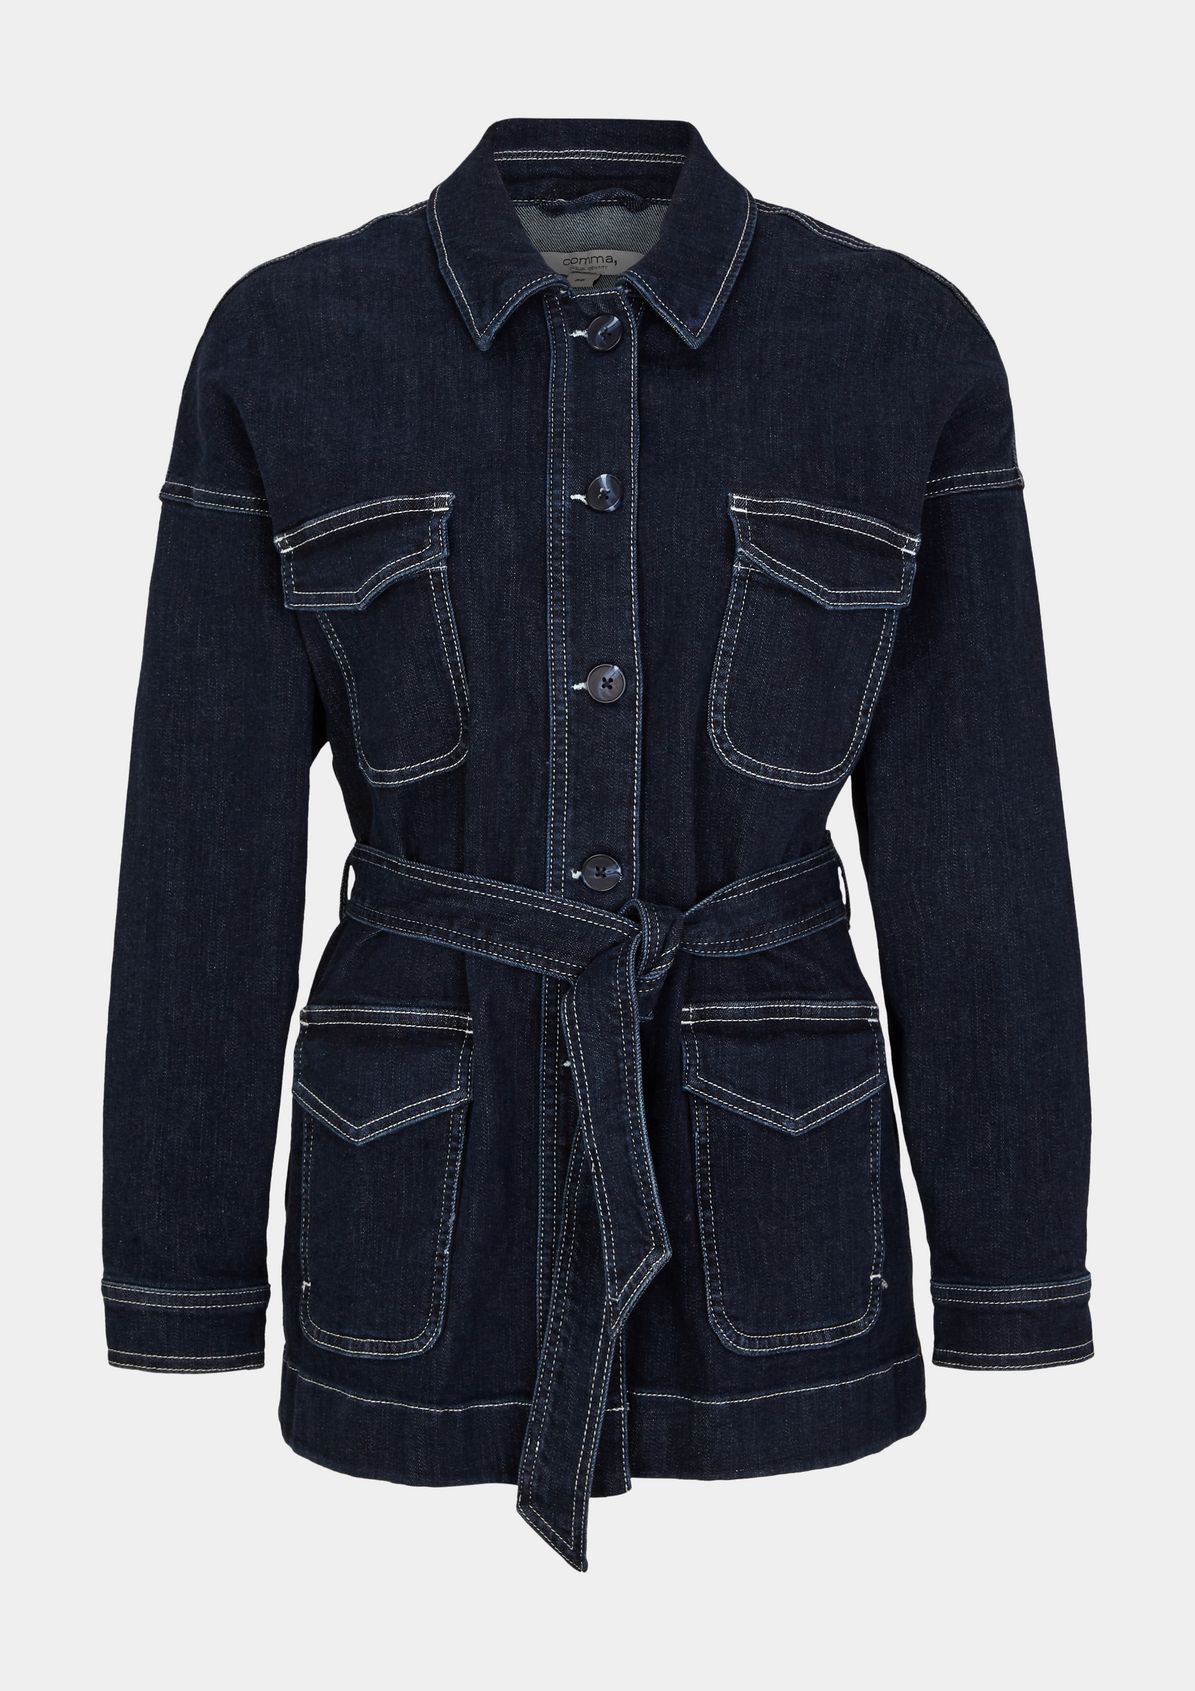 Denim jacket with a tie belt from comma